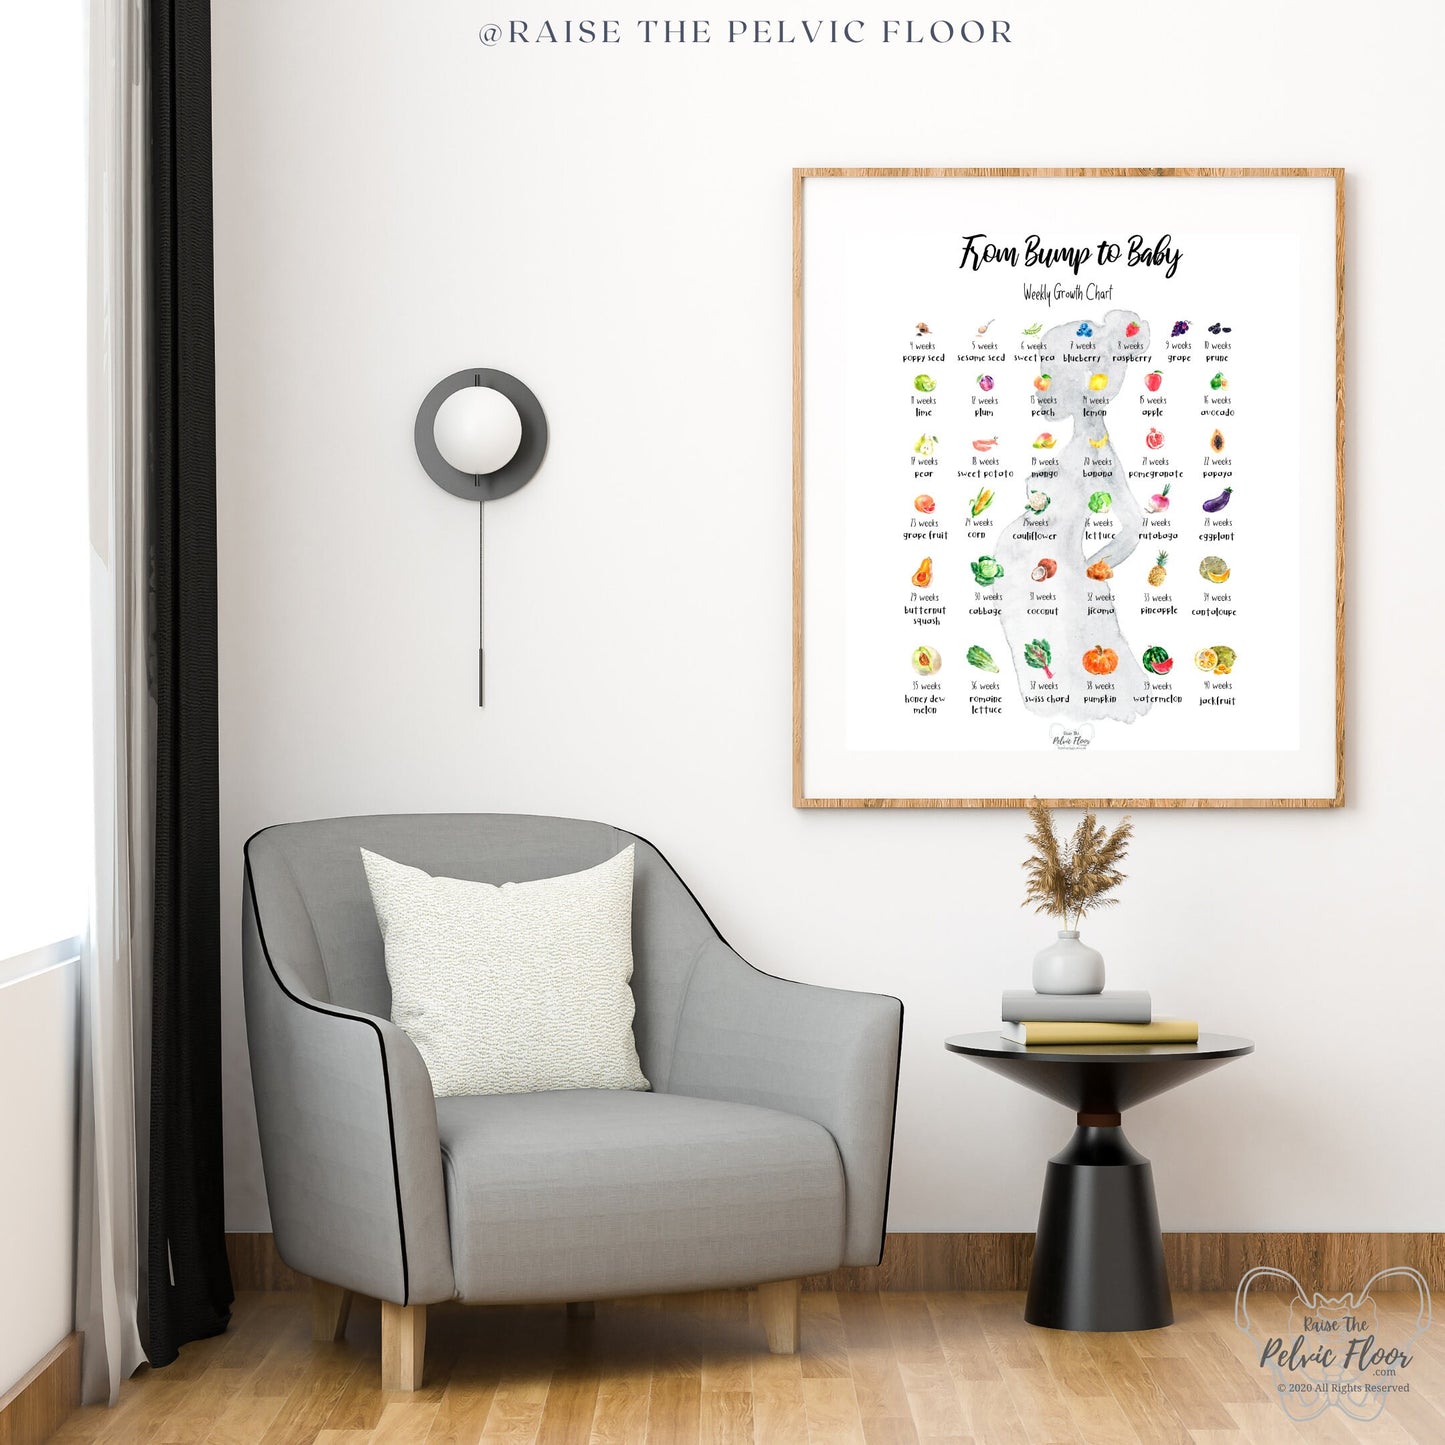 Bump to Baby- Pregnancy Art Weekly Fruit Growth Chart | Nursery Wall Poster Print